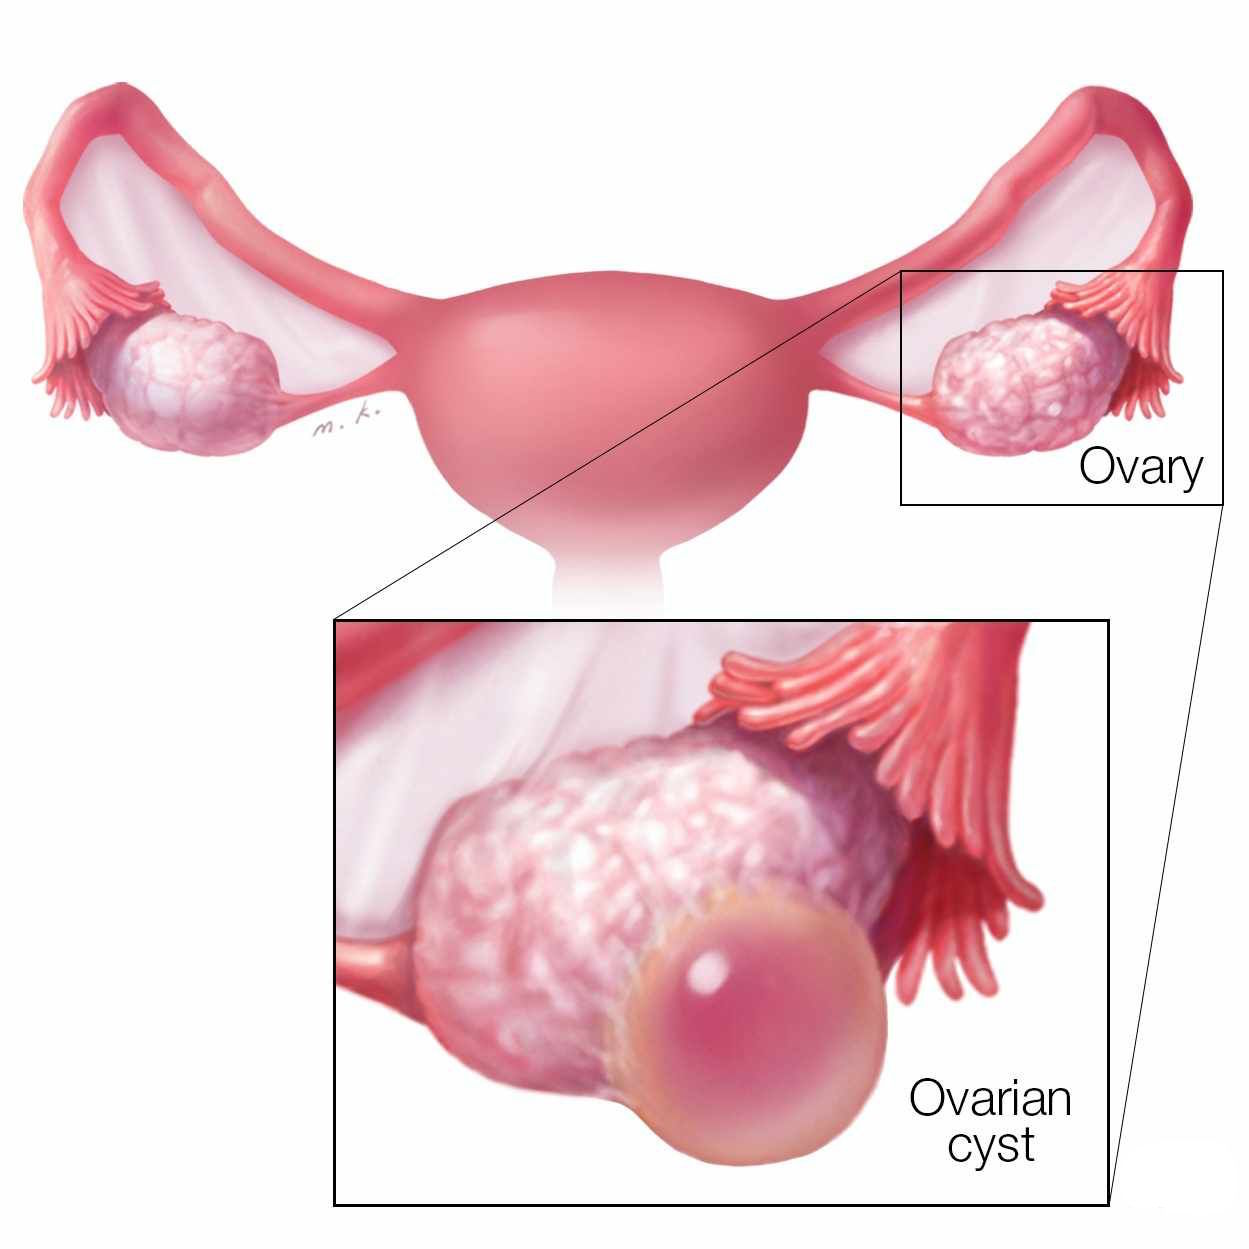 https://drtathed.com/wp-content/uploads/2022/08/OVARIAN-CYSTS-CAUSES-SYMPTOMS-AND-TREATMENTS-1.jpg